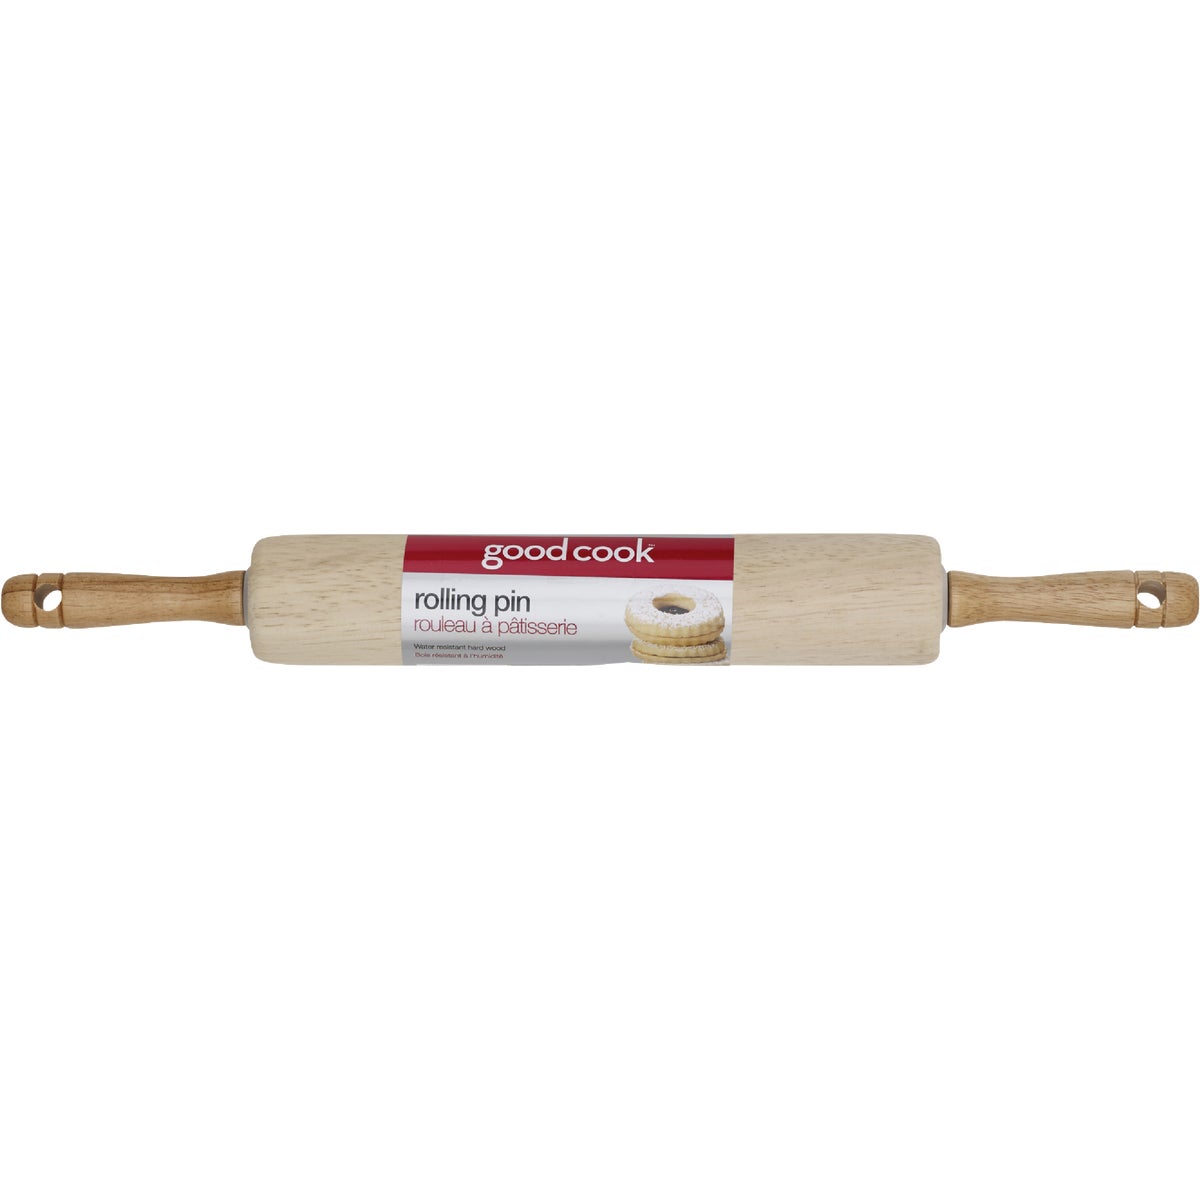 Goodcook 10 In. x 2 In. Wood Rolling Pin